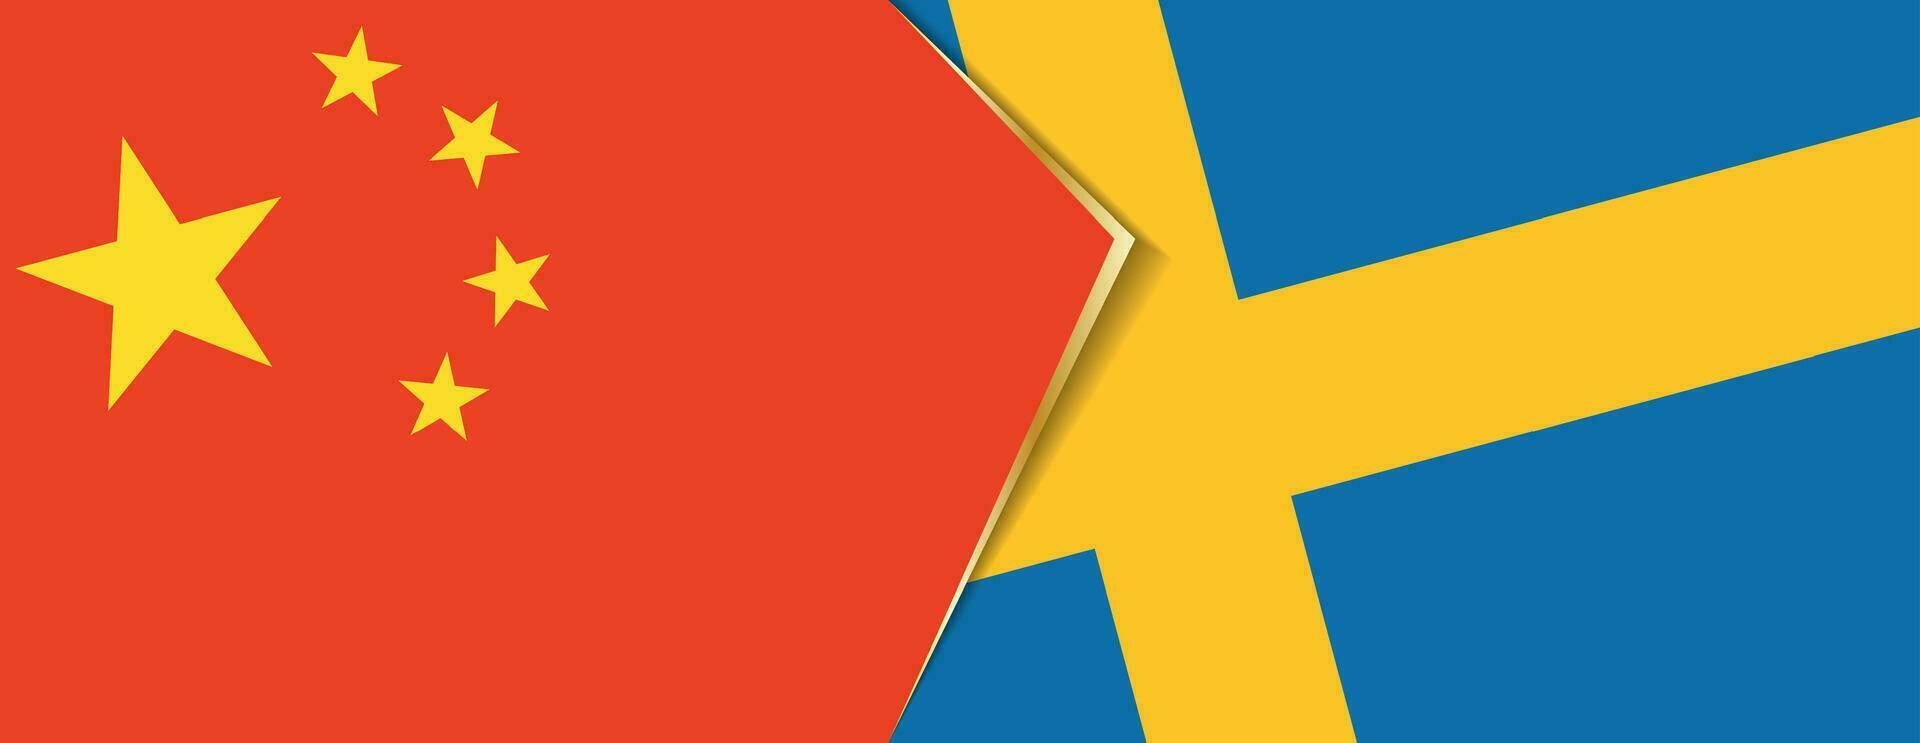 China and Sweden flags, two vector flags.